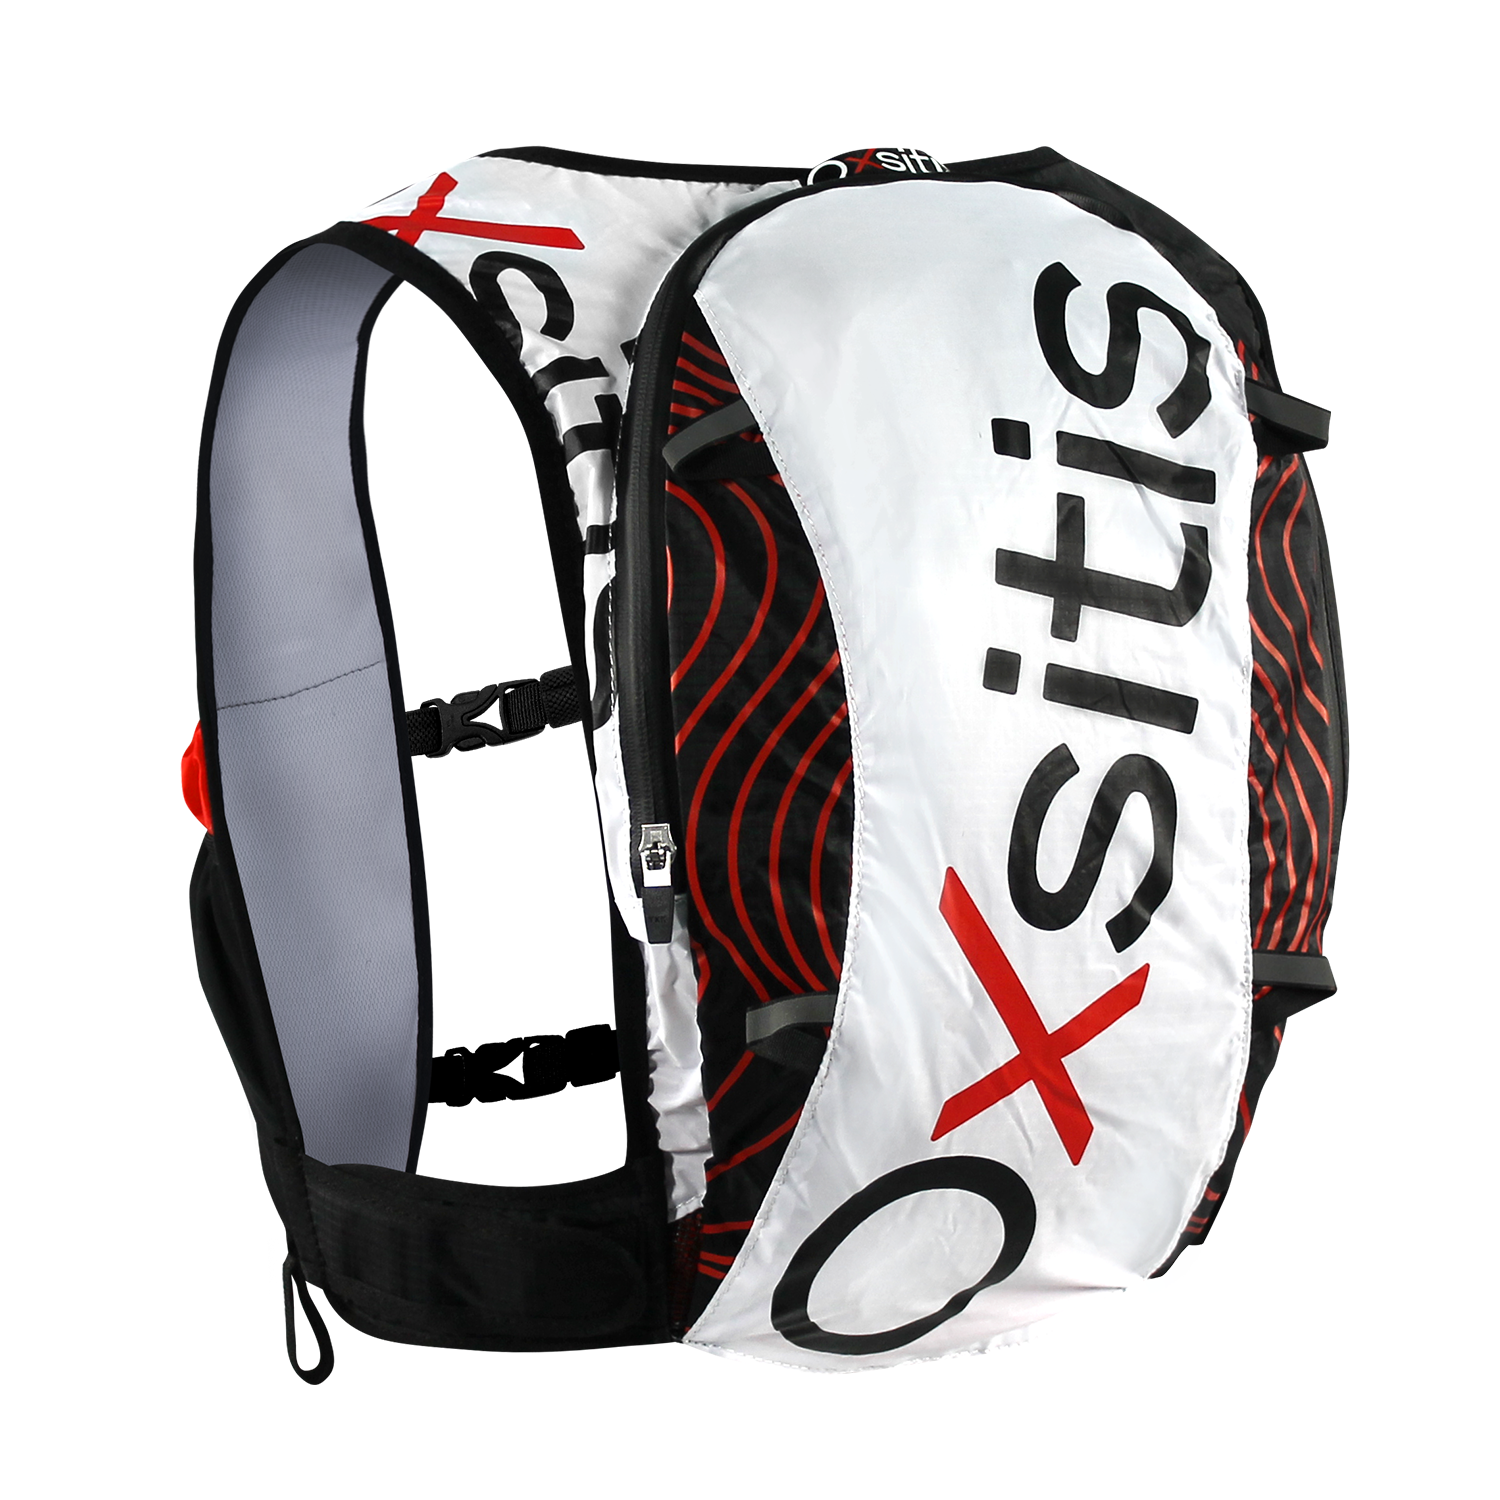 Oxsitis Pulse 8 - Trail running backpack